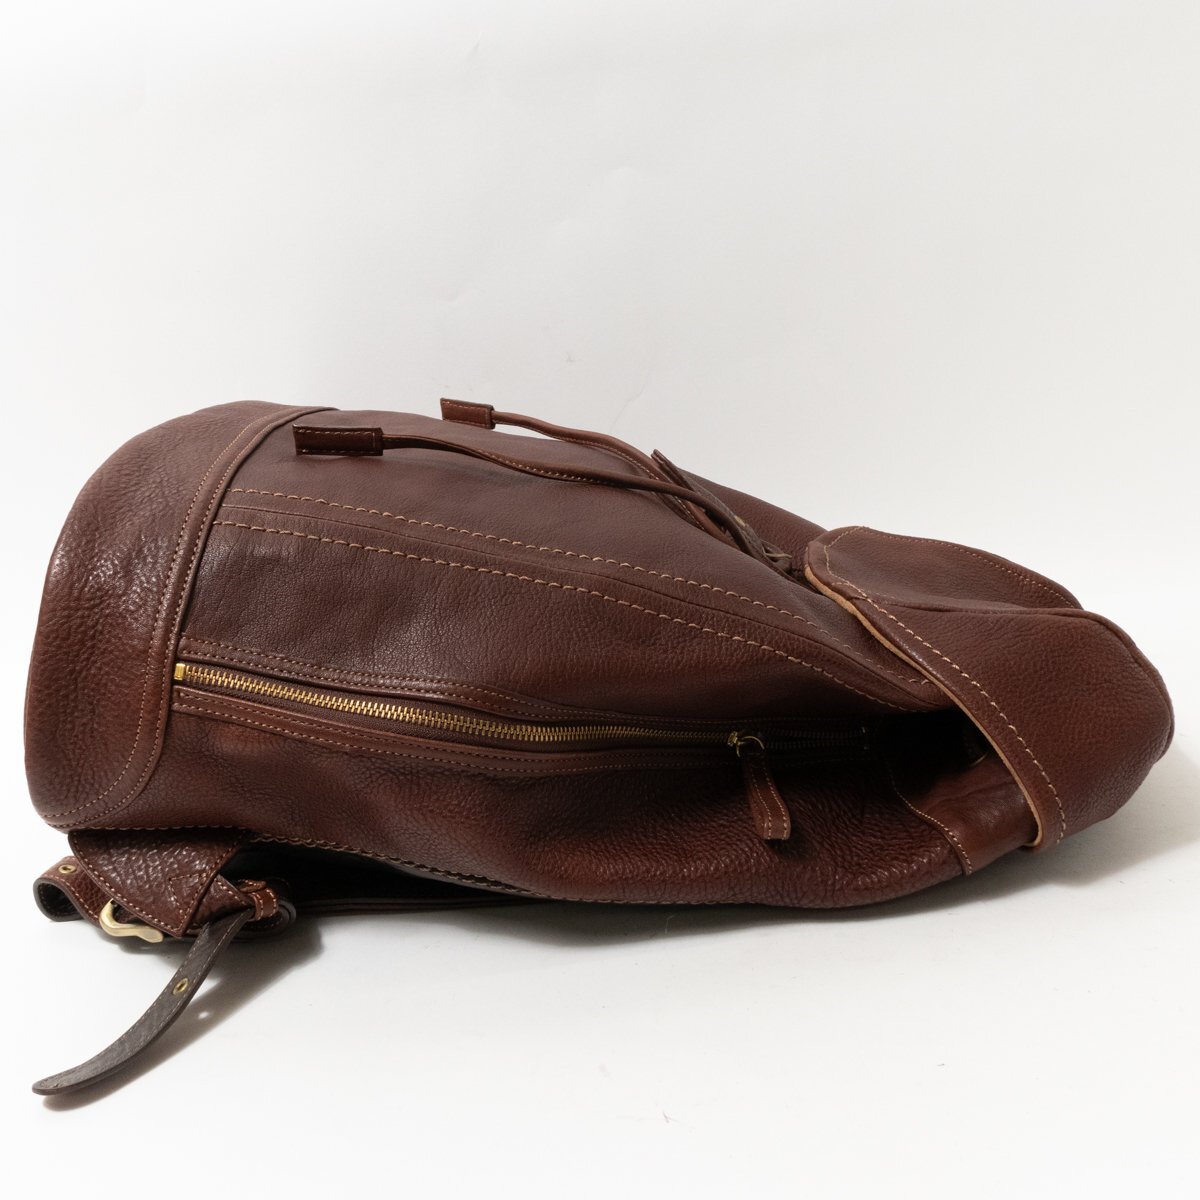 [1 jpy start ] earth shop bag manufacture place TSUCHIYA KABAN pouch type rucksack backpack leather original leather dark brown hook opening and closing casual bag 